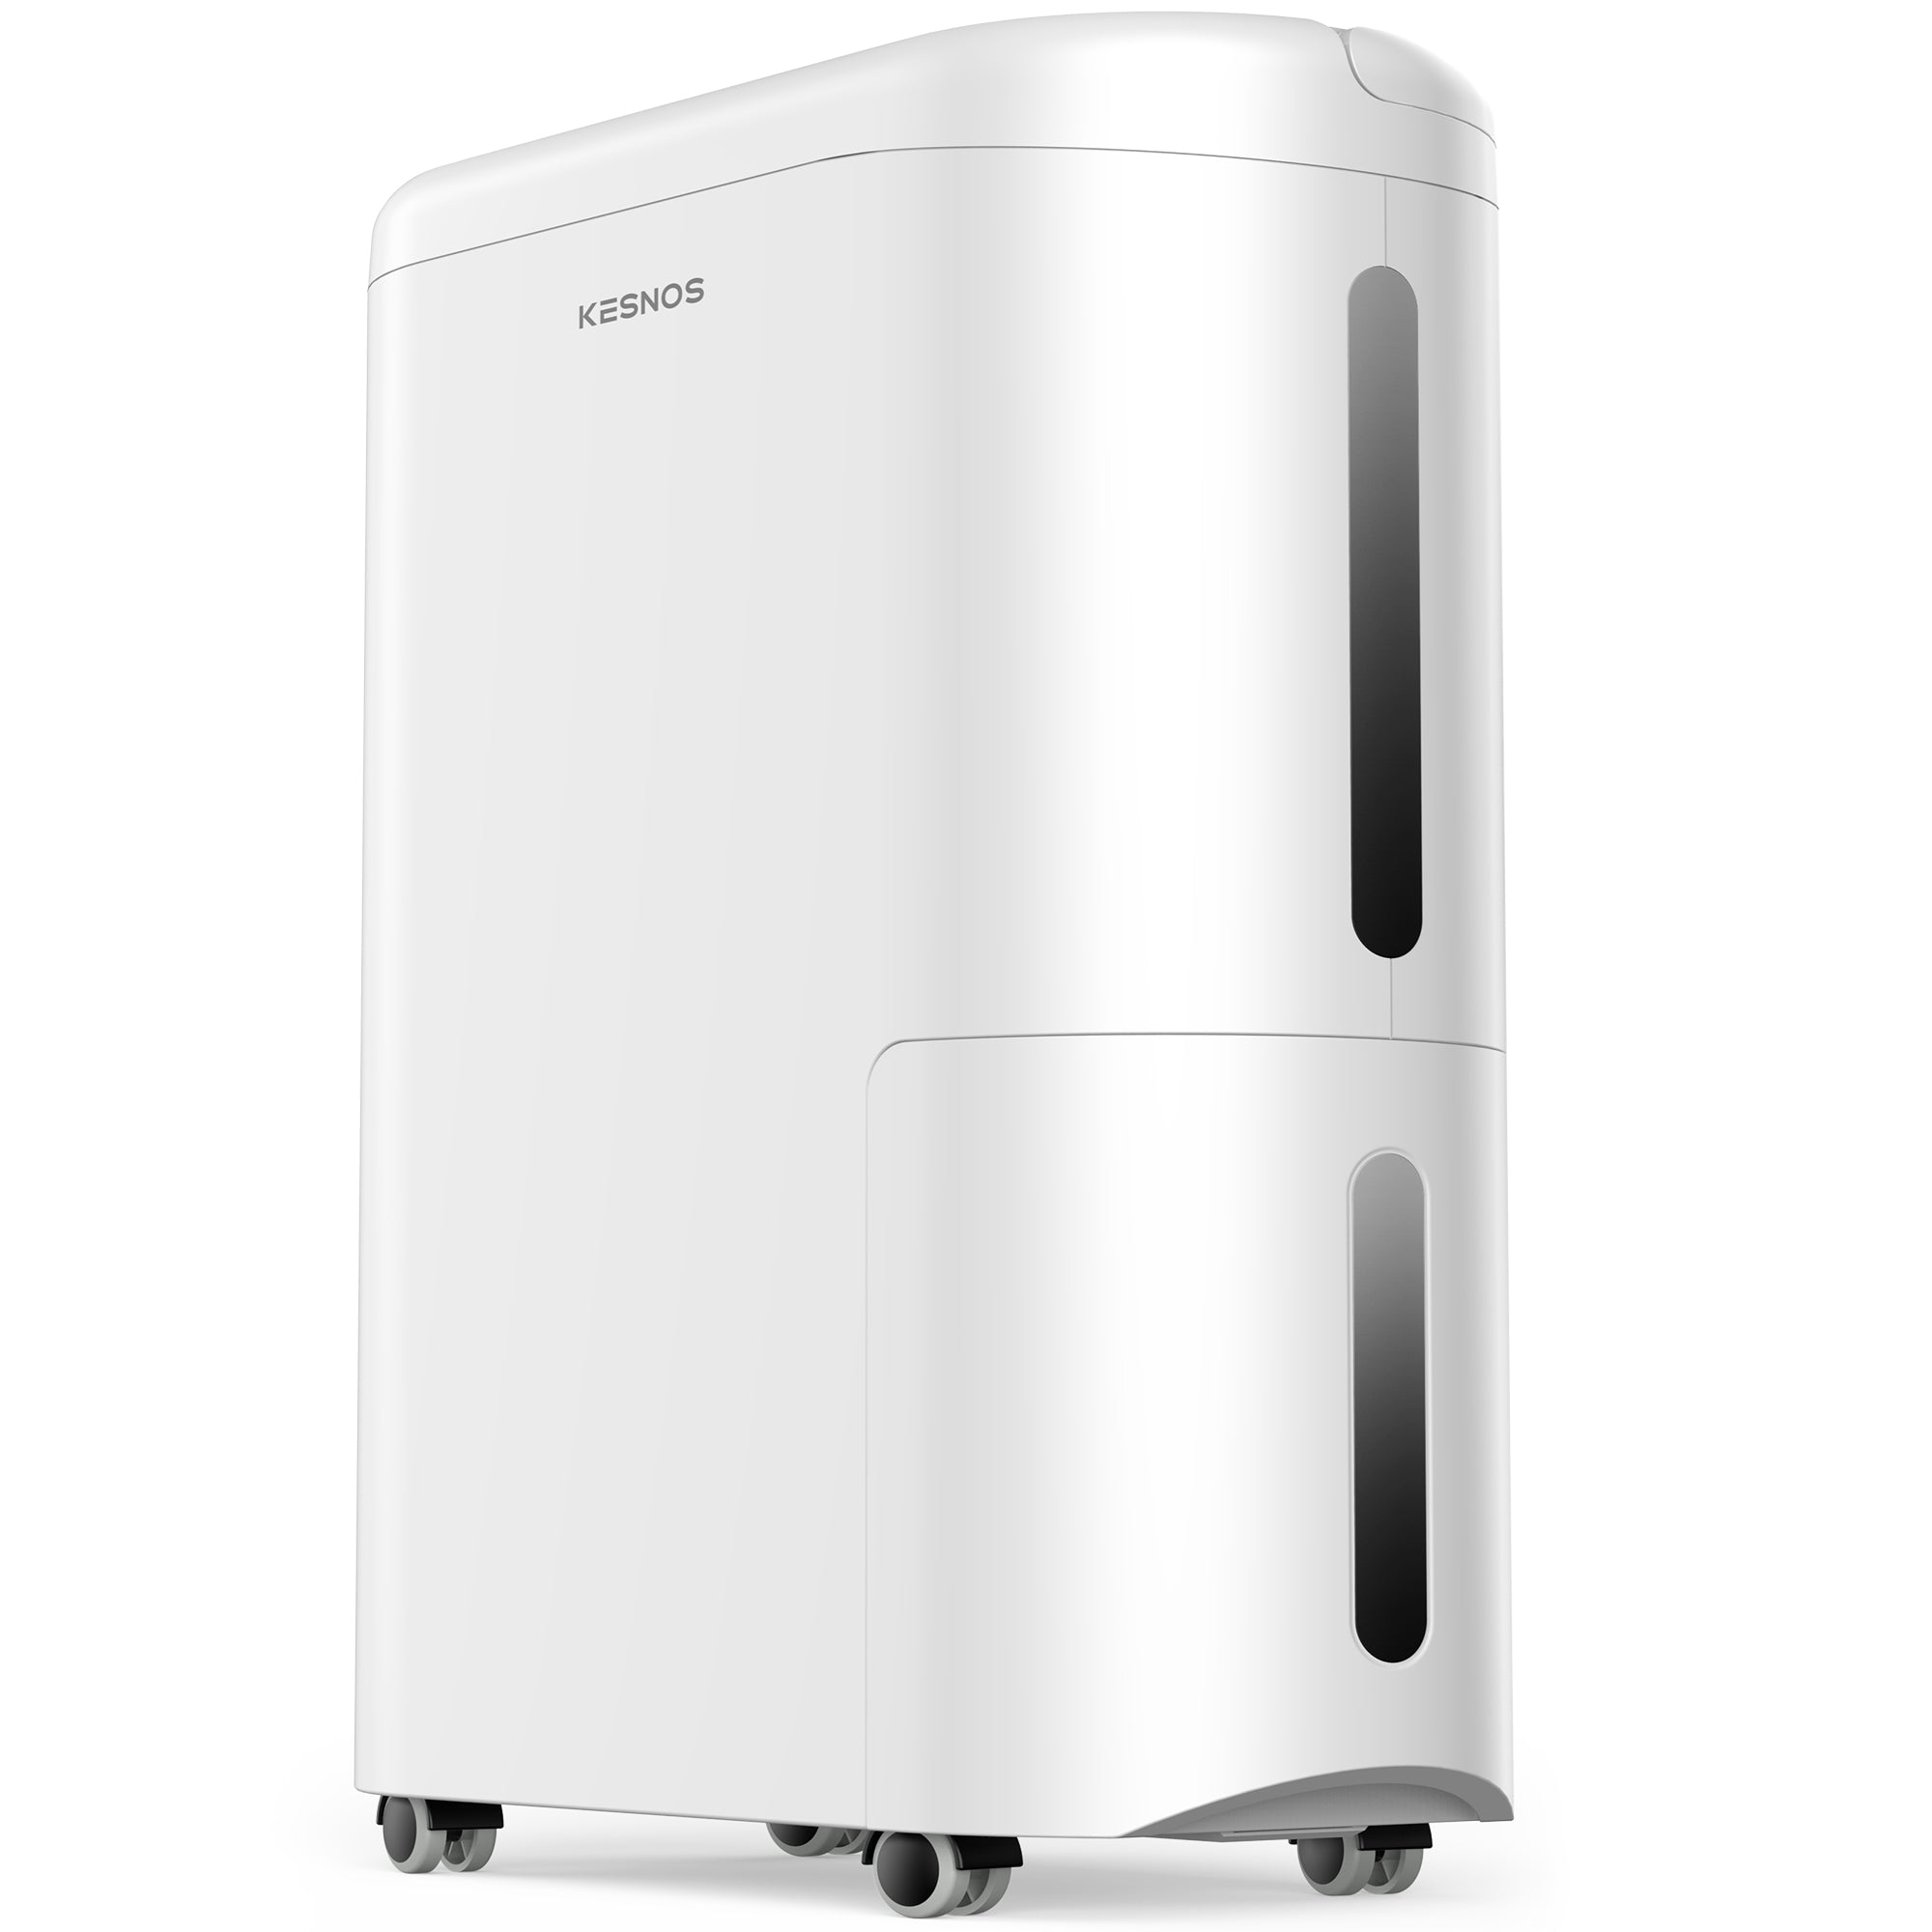 4500 Sq. Ft Large Dehumidifier for Home and Basement with 6.56ft Drain Hose  and 0.92 Gallon Large Water Tank, 24Hr Timer and Auto Defrost Ideal for